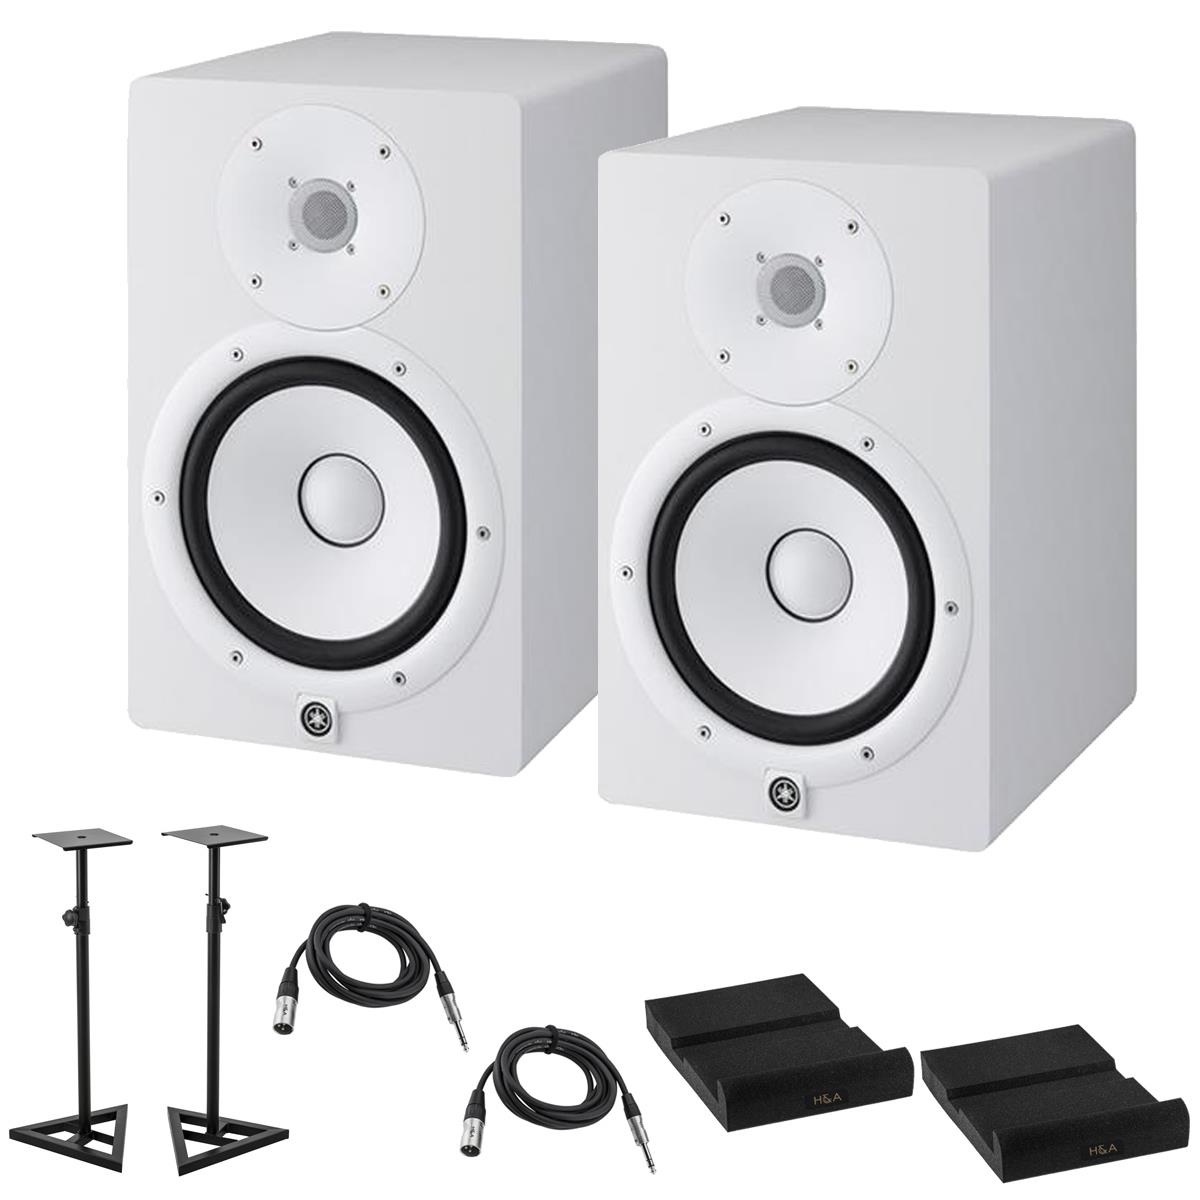 Yamaha 2x HS8 Powered Studio Monitor, White with Accessories Kit -  HS8 W AK